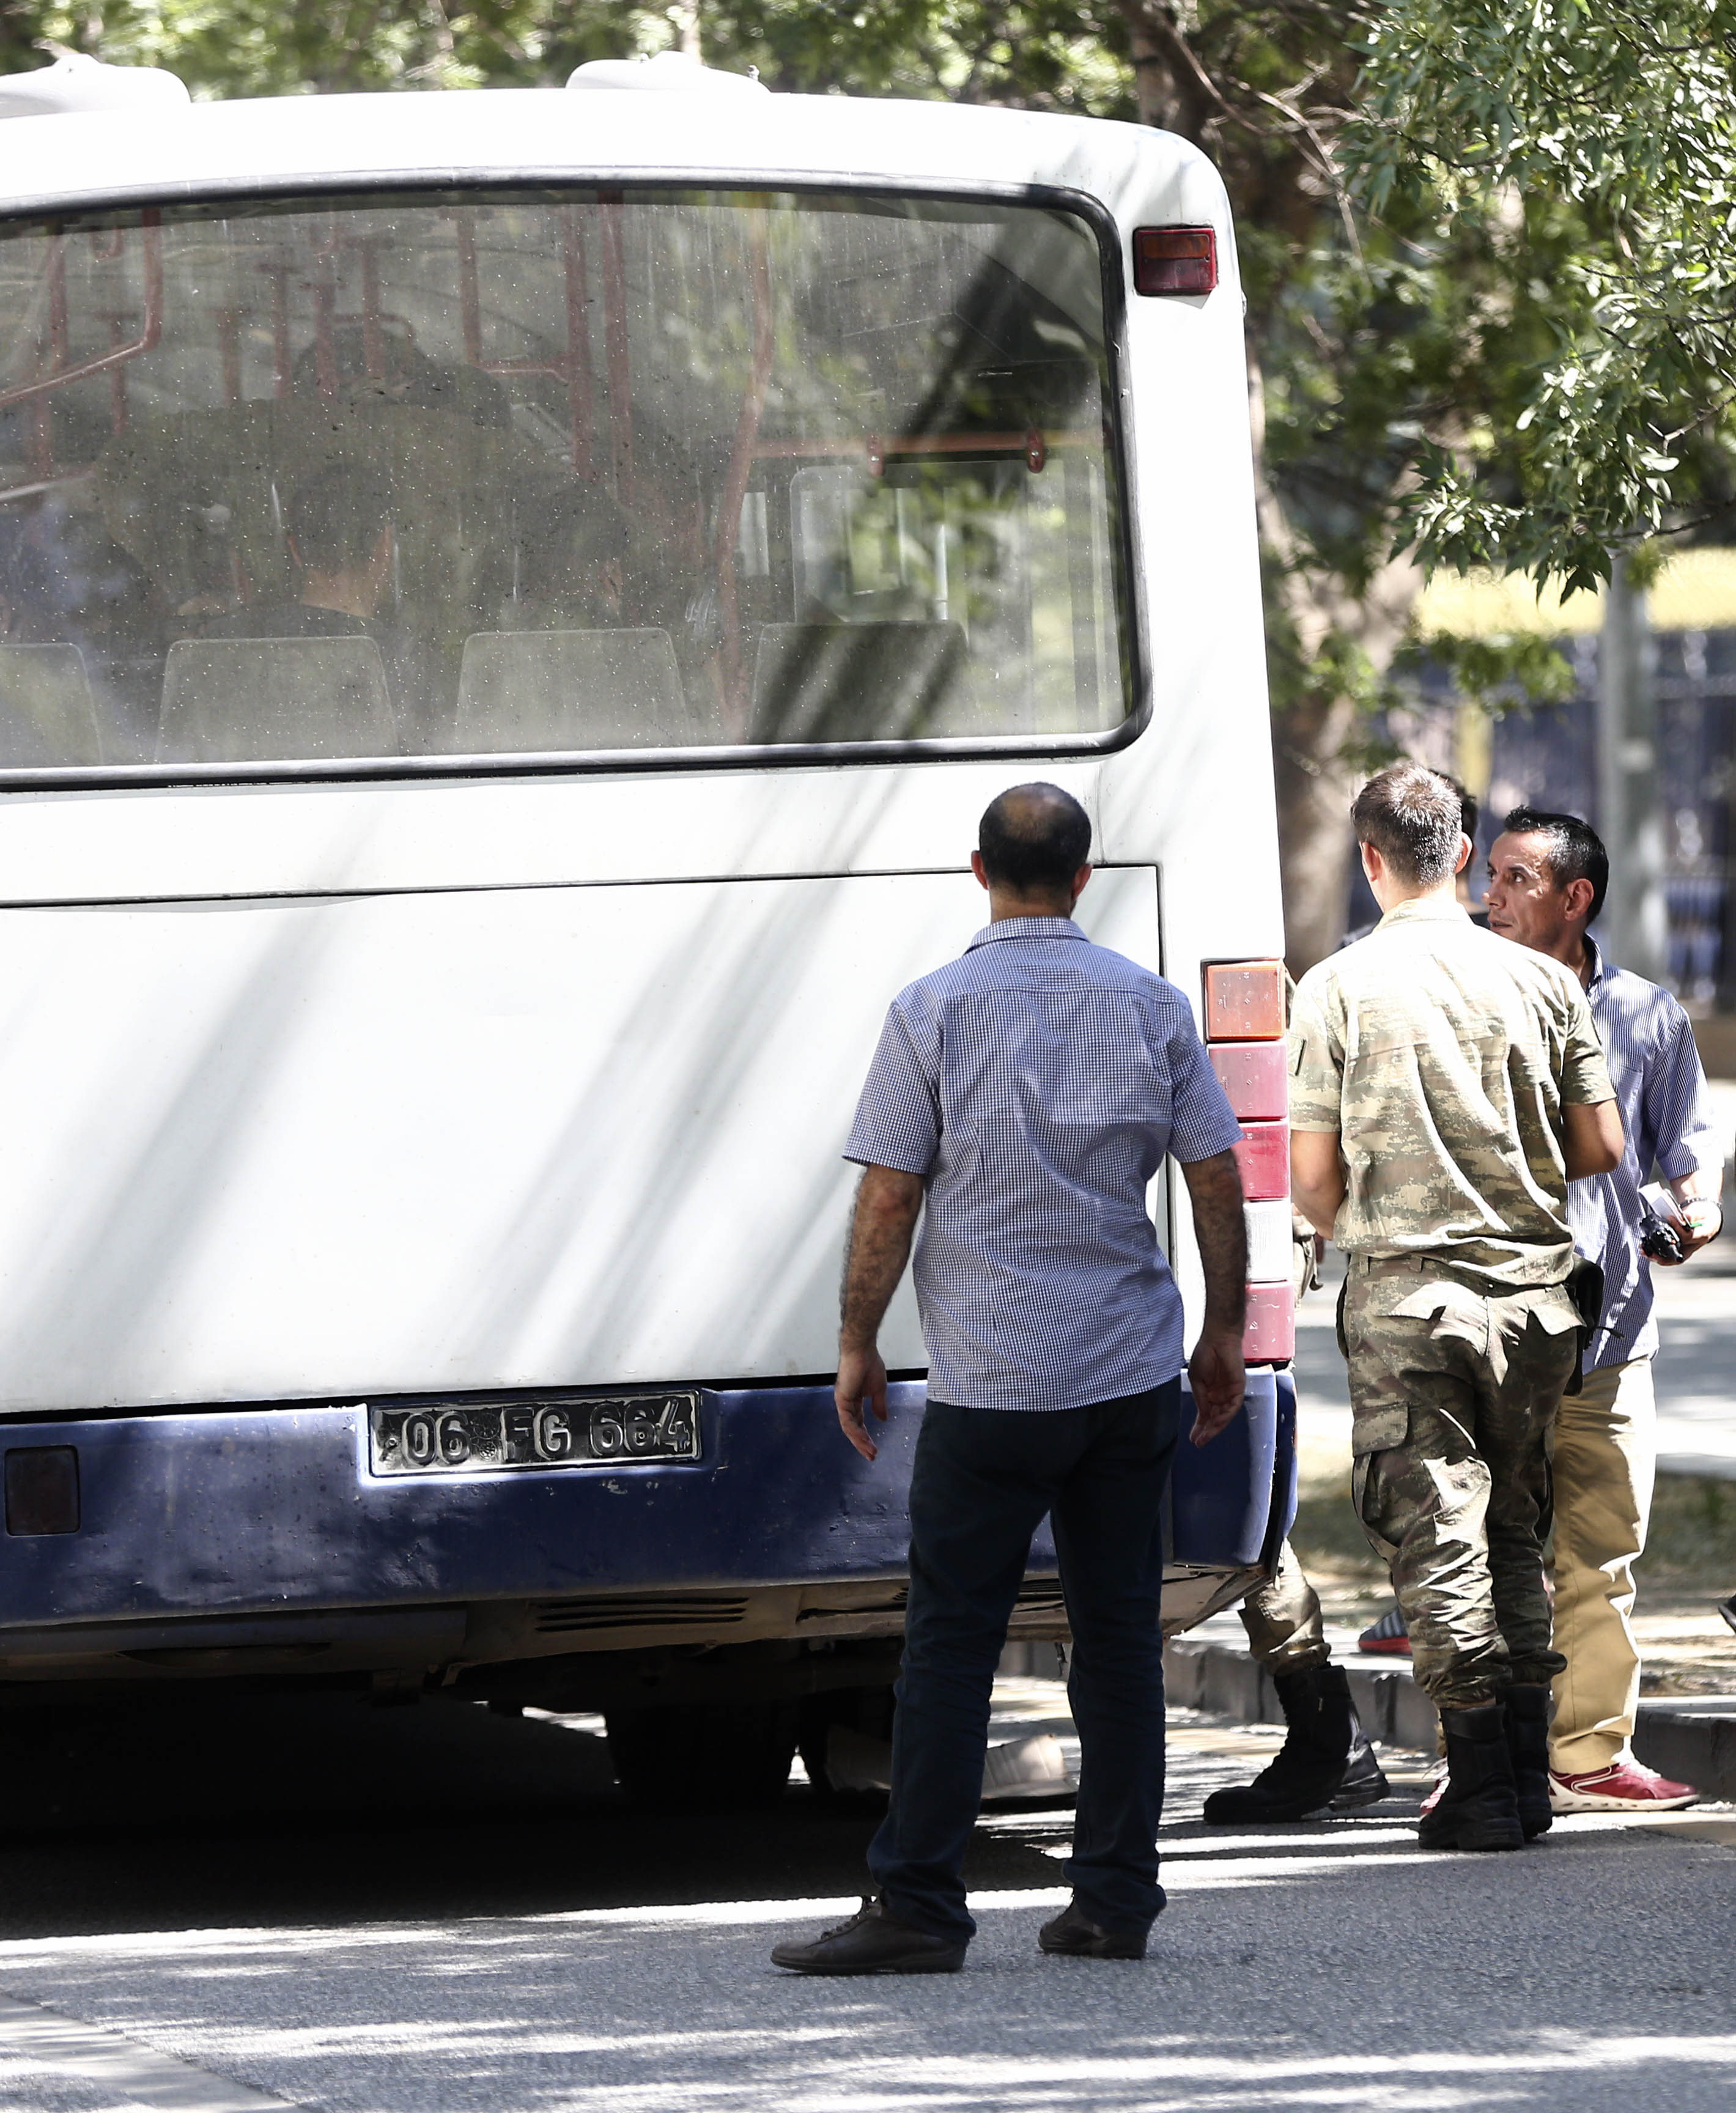 Junior and commissioned officers who did not join the coup attempt and were held handcuffed inside the General Staff Command were discharged in the early hours of the morning.